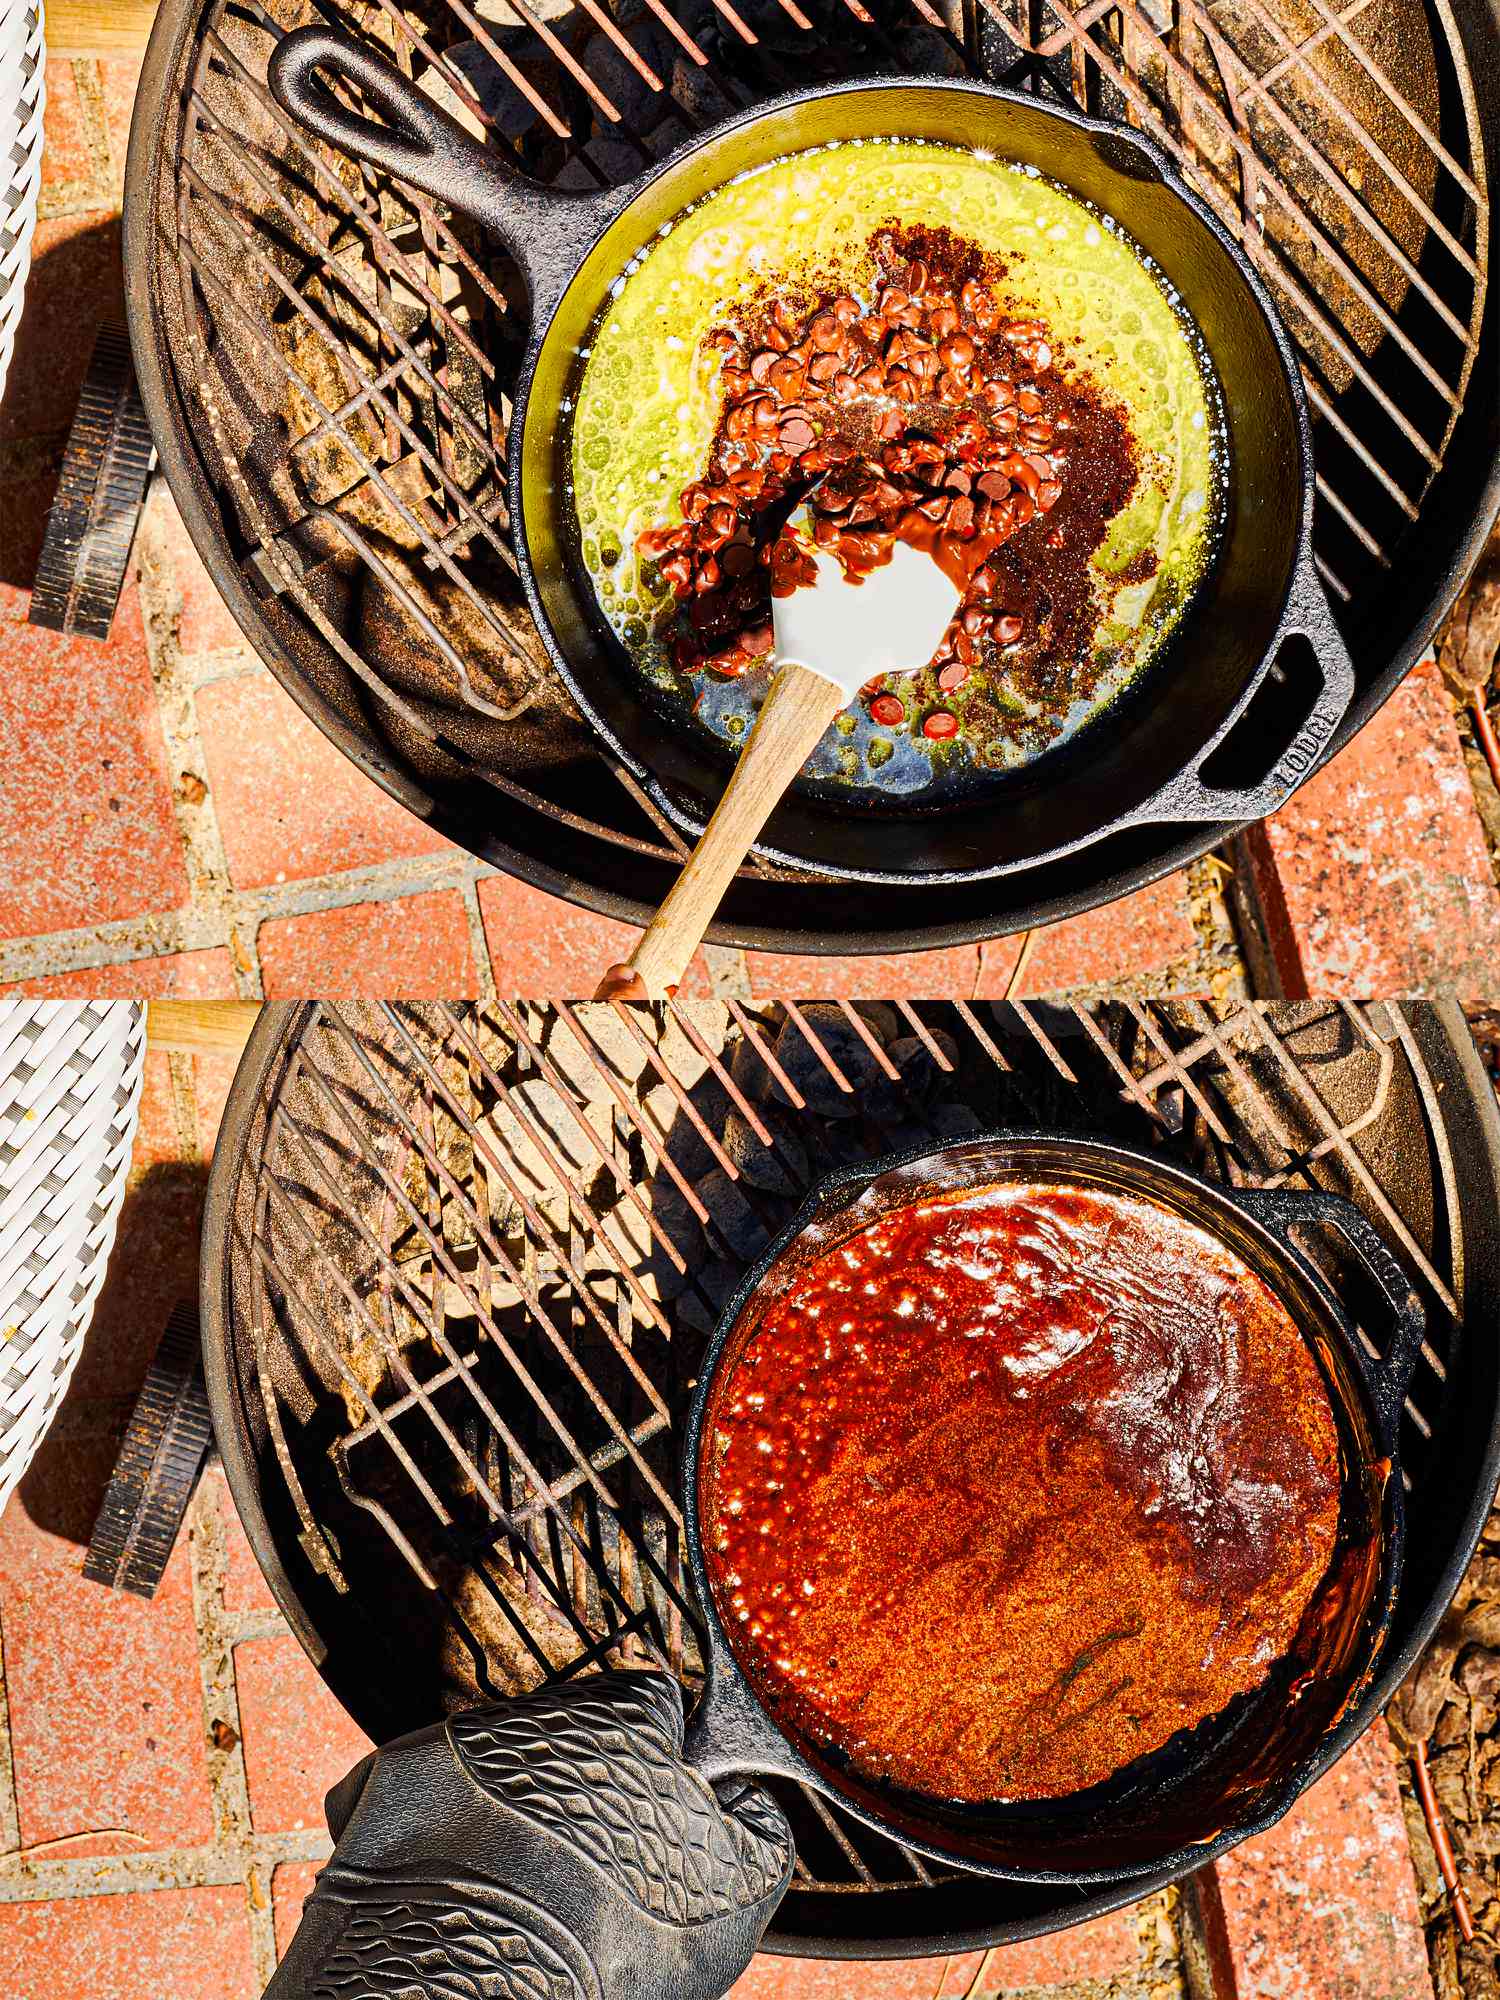 Two image collage of melting on skillet on grill